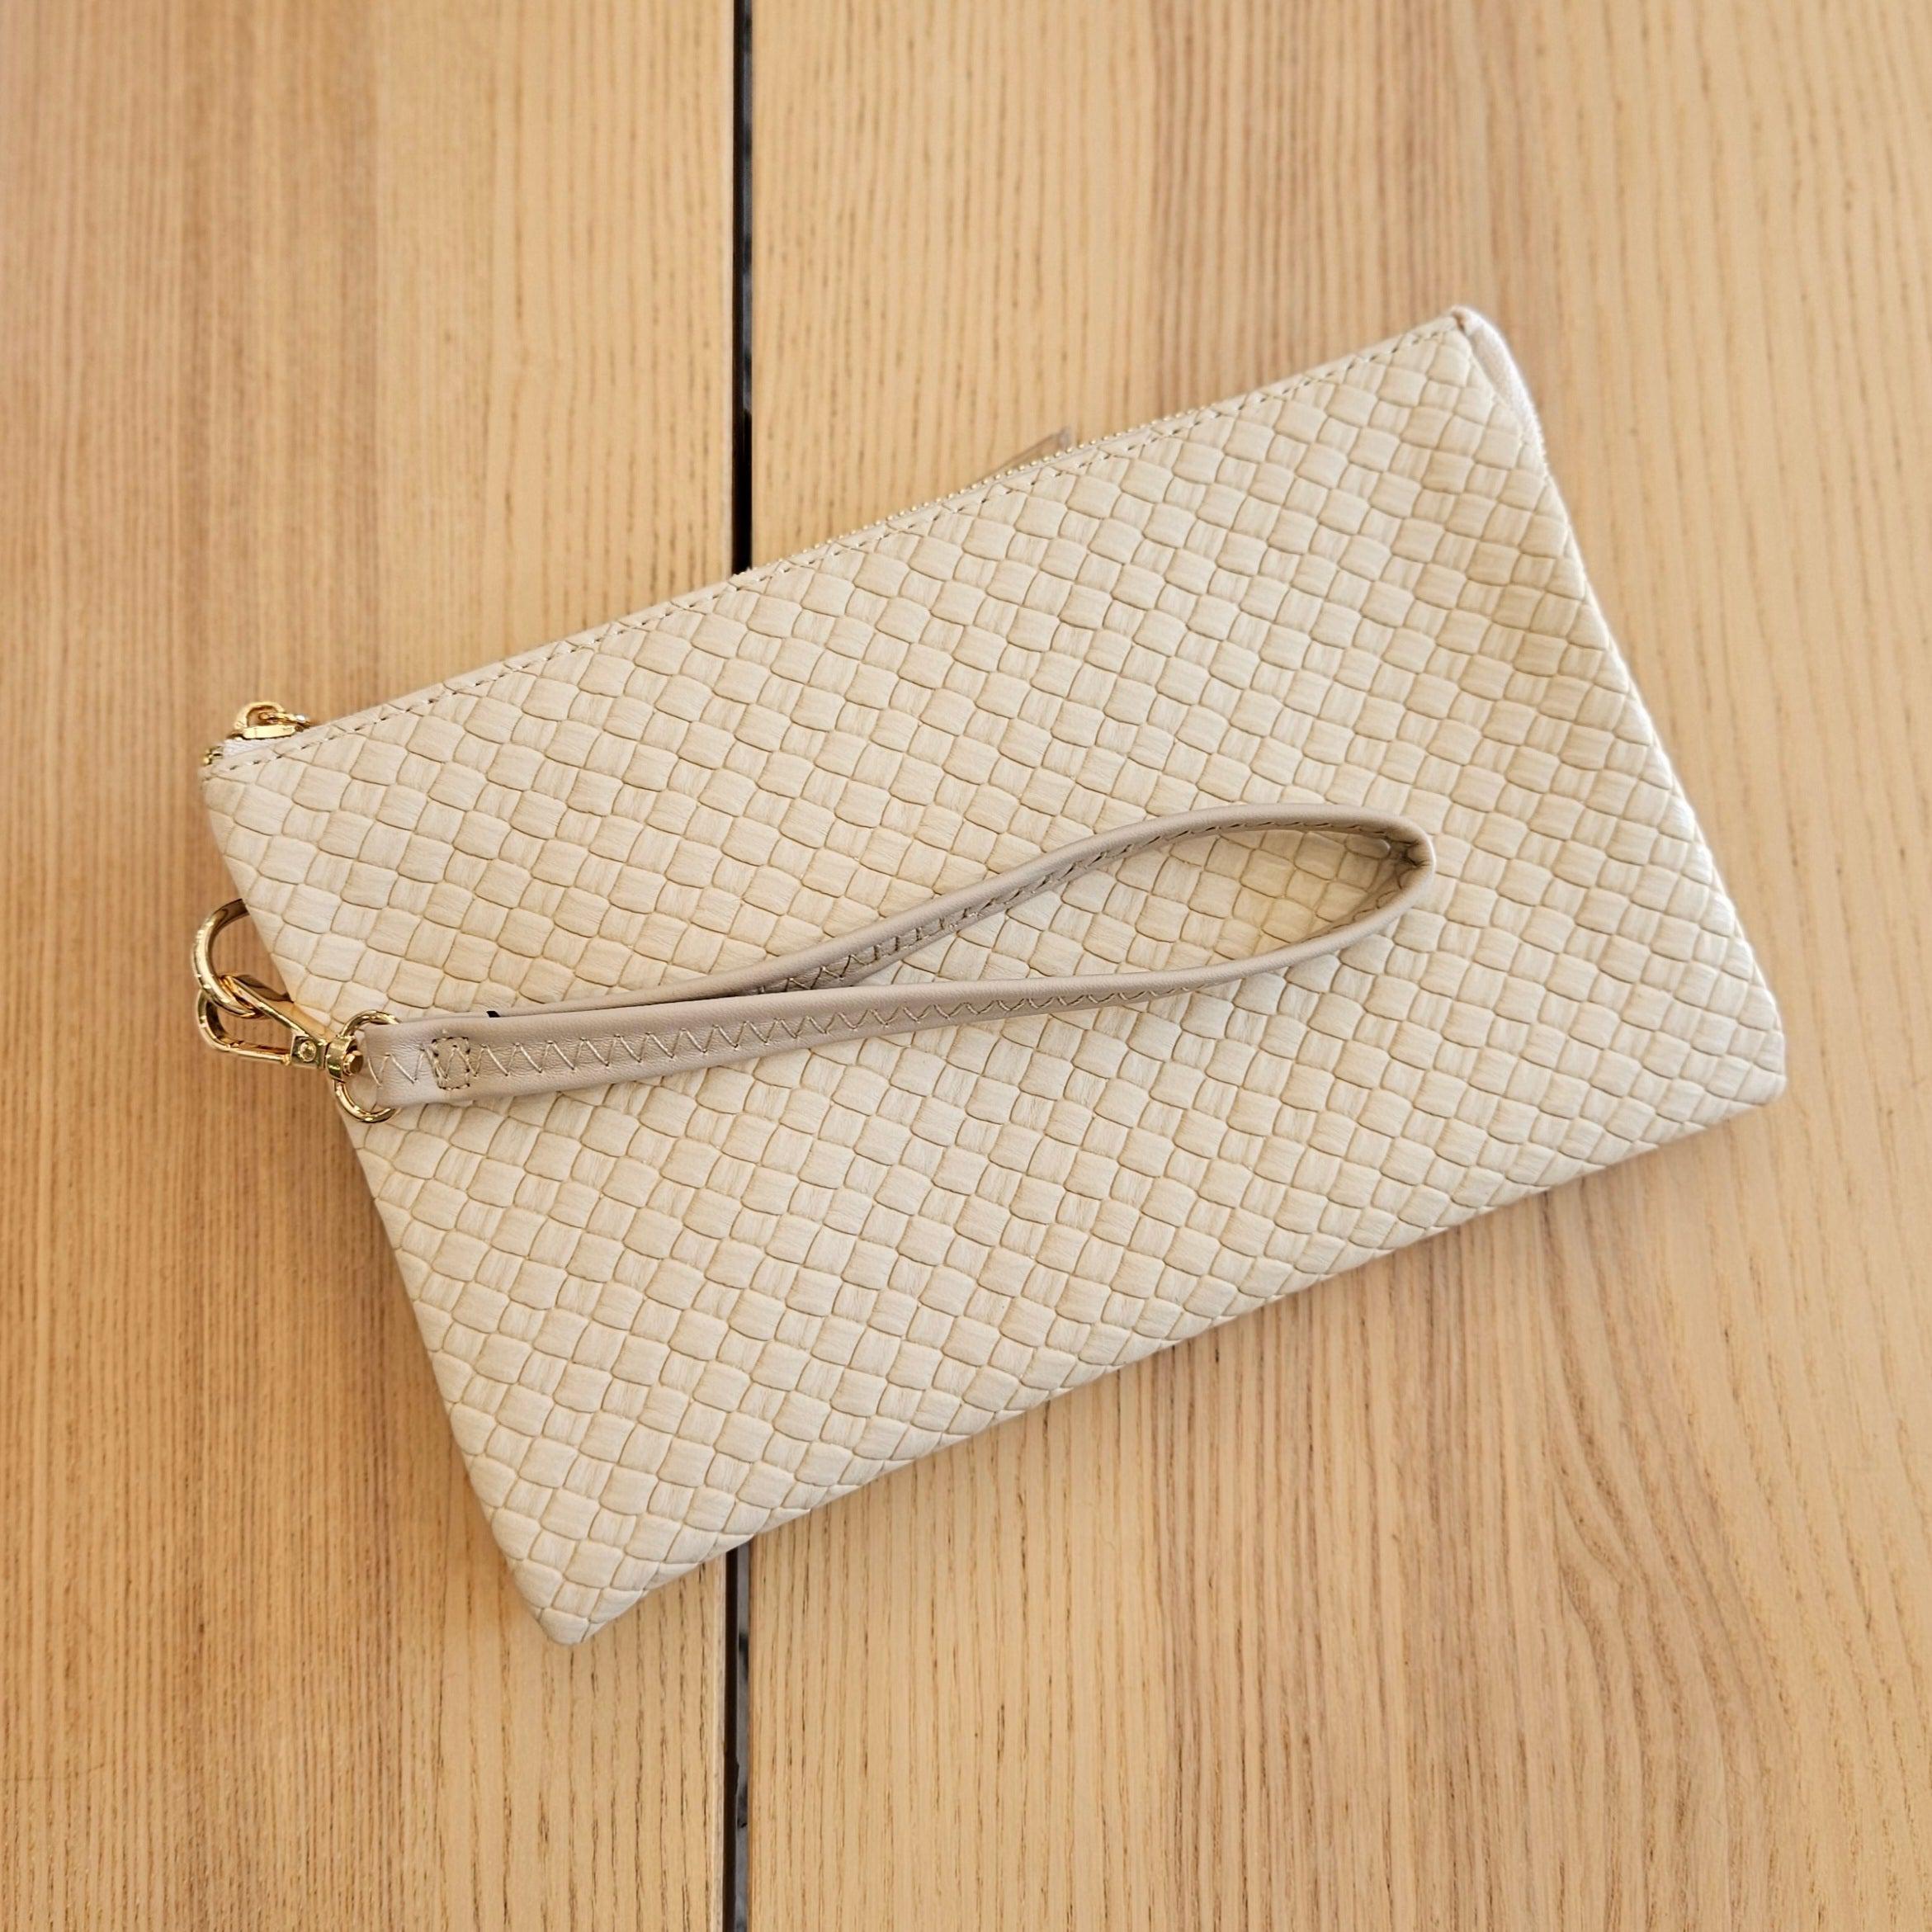 Shop Izzy Woven Crossbody with Canvas Strap-Purse at Ruby Joy Boutique, a Women's Clothing Store in Pickerington, Ohio